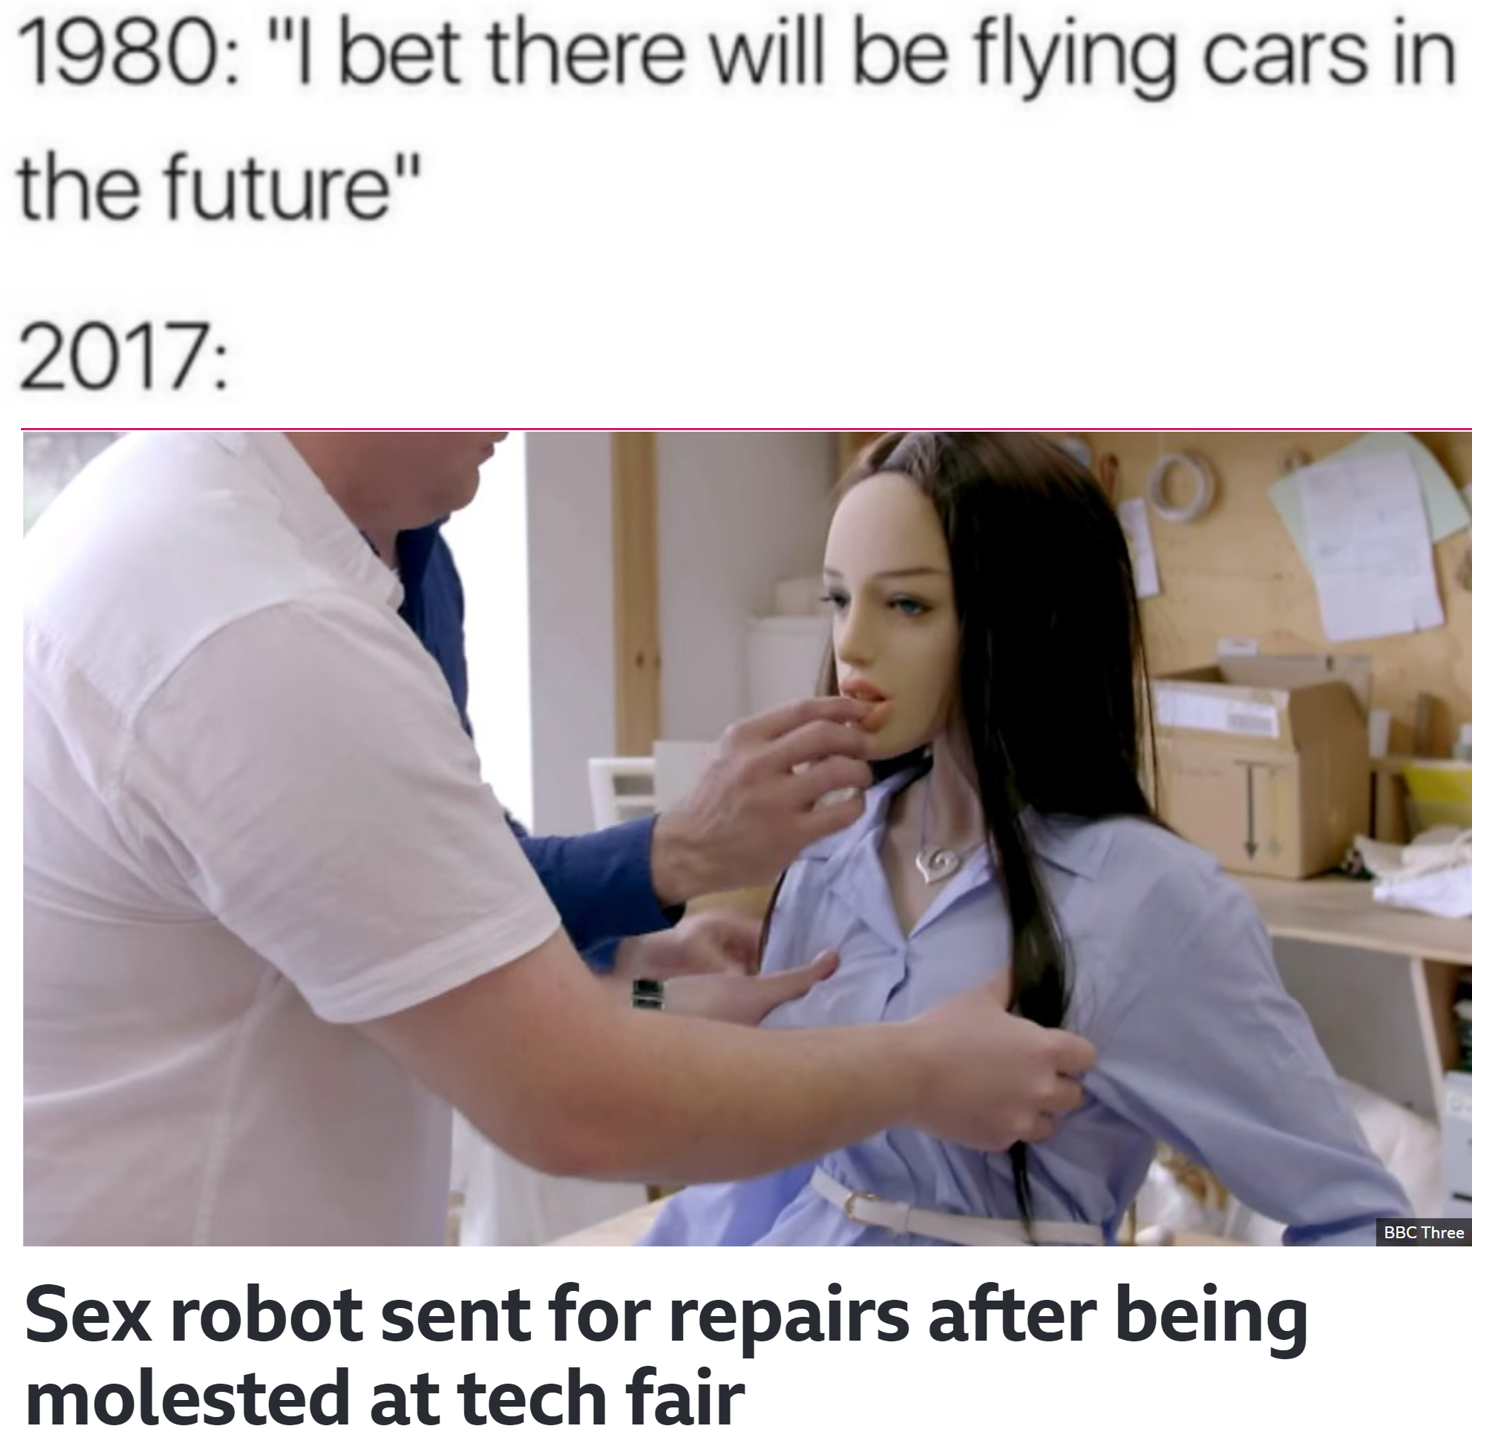 Meme about thinking we will have flying cars in the future back in the 80's but in 2017 we got sex robots being molested at tech fairs.